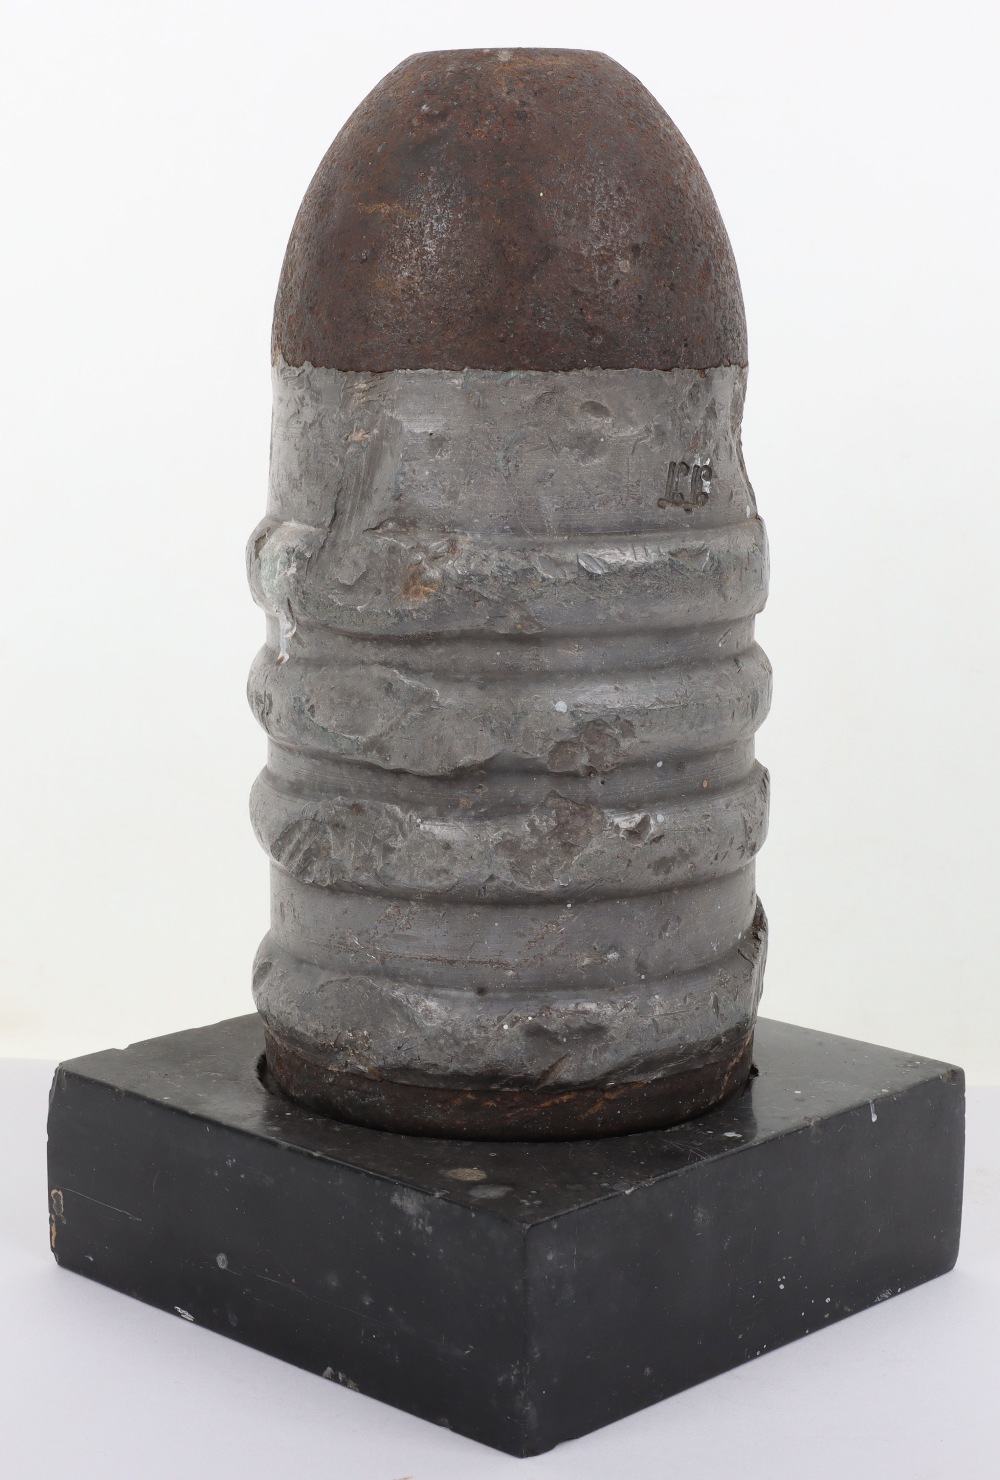 Artillery Shell Head from the Battle of Pirot During the Servo-Bulgarian War 1885 Presented to H.R.H - Image 5 of 8